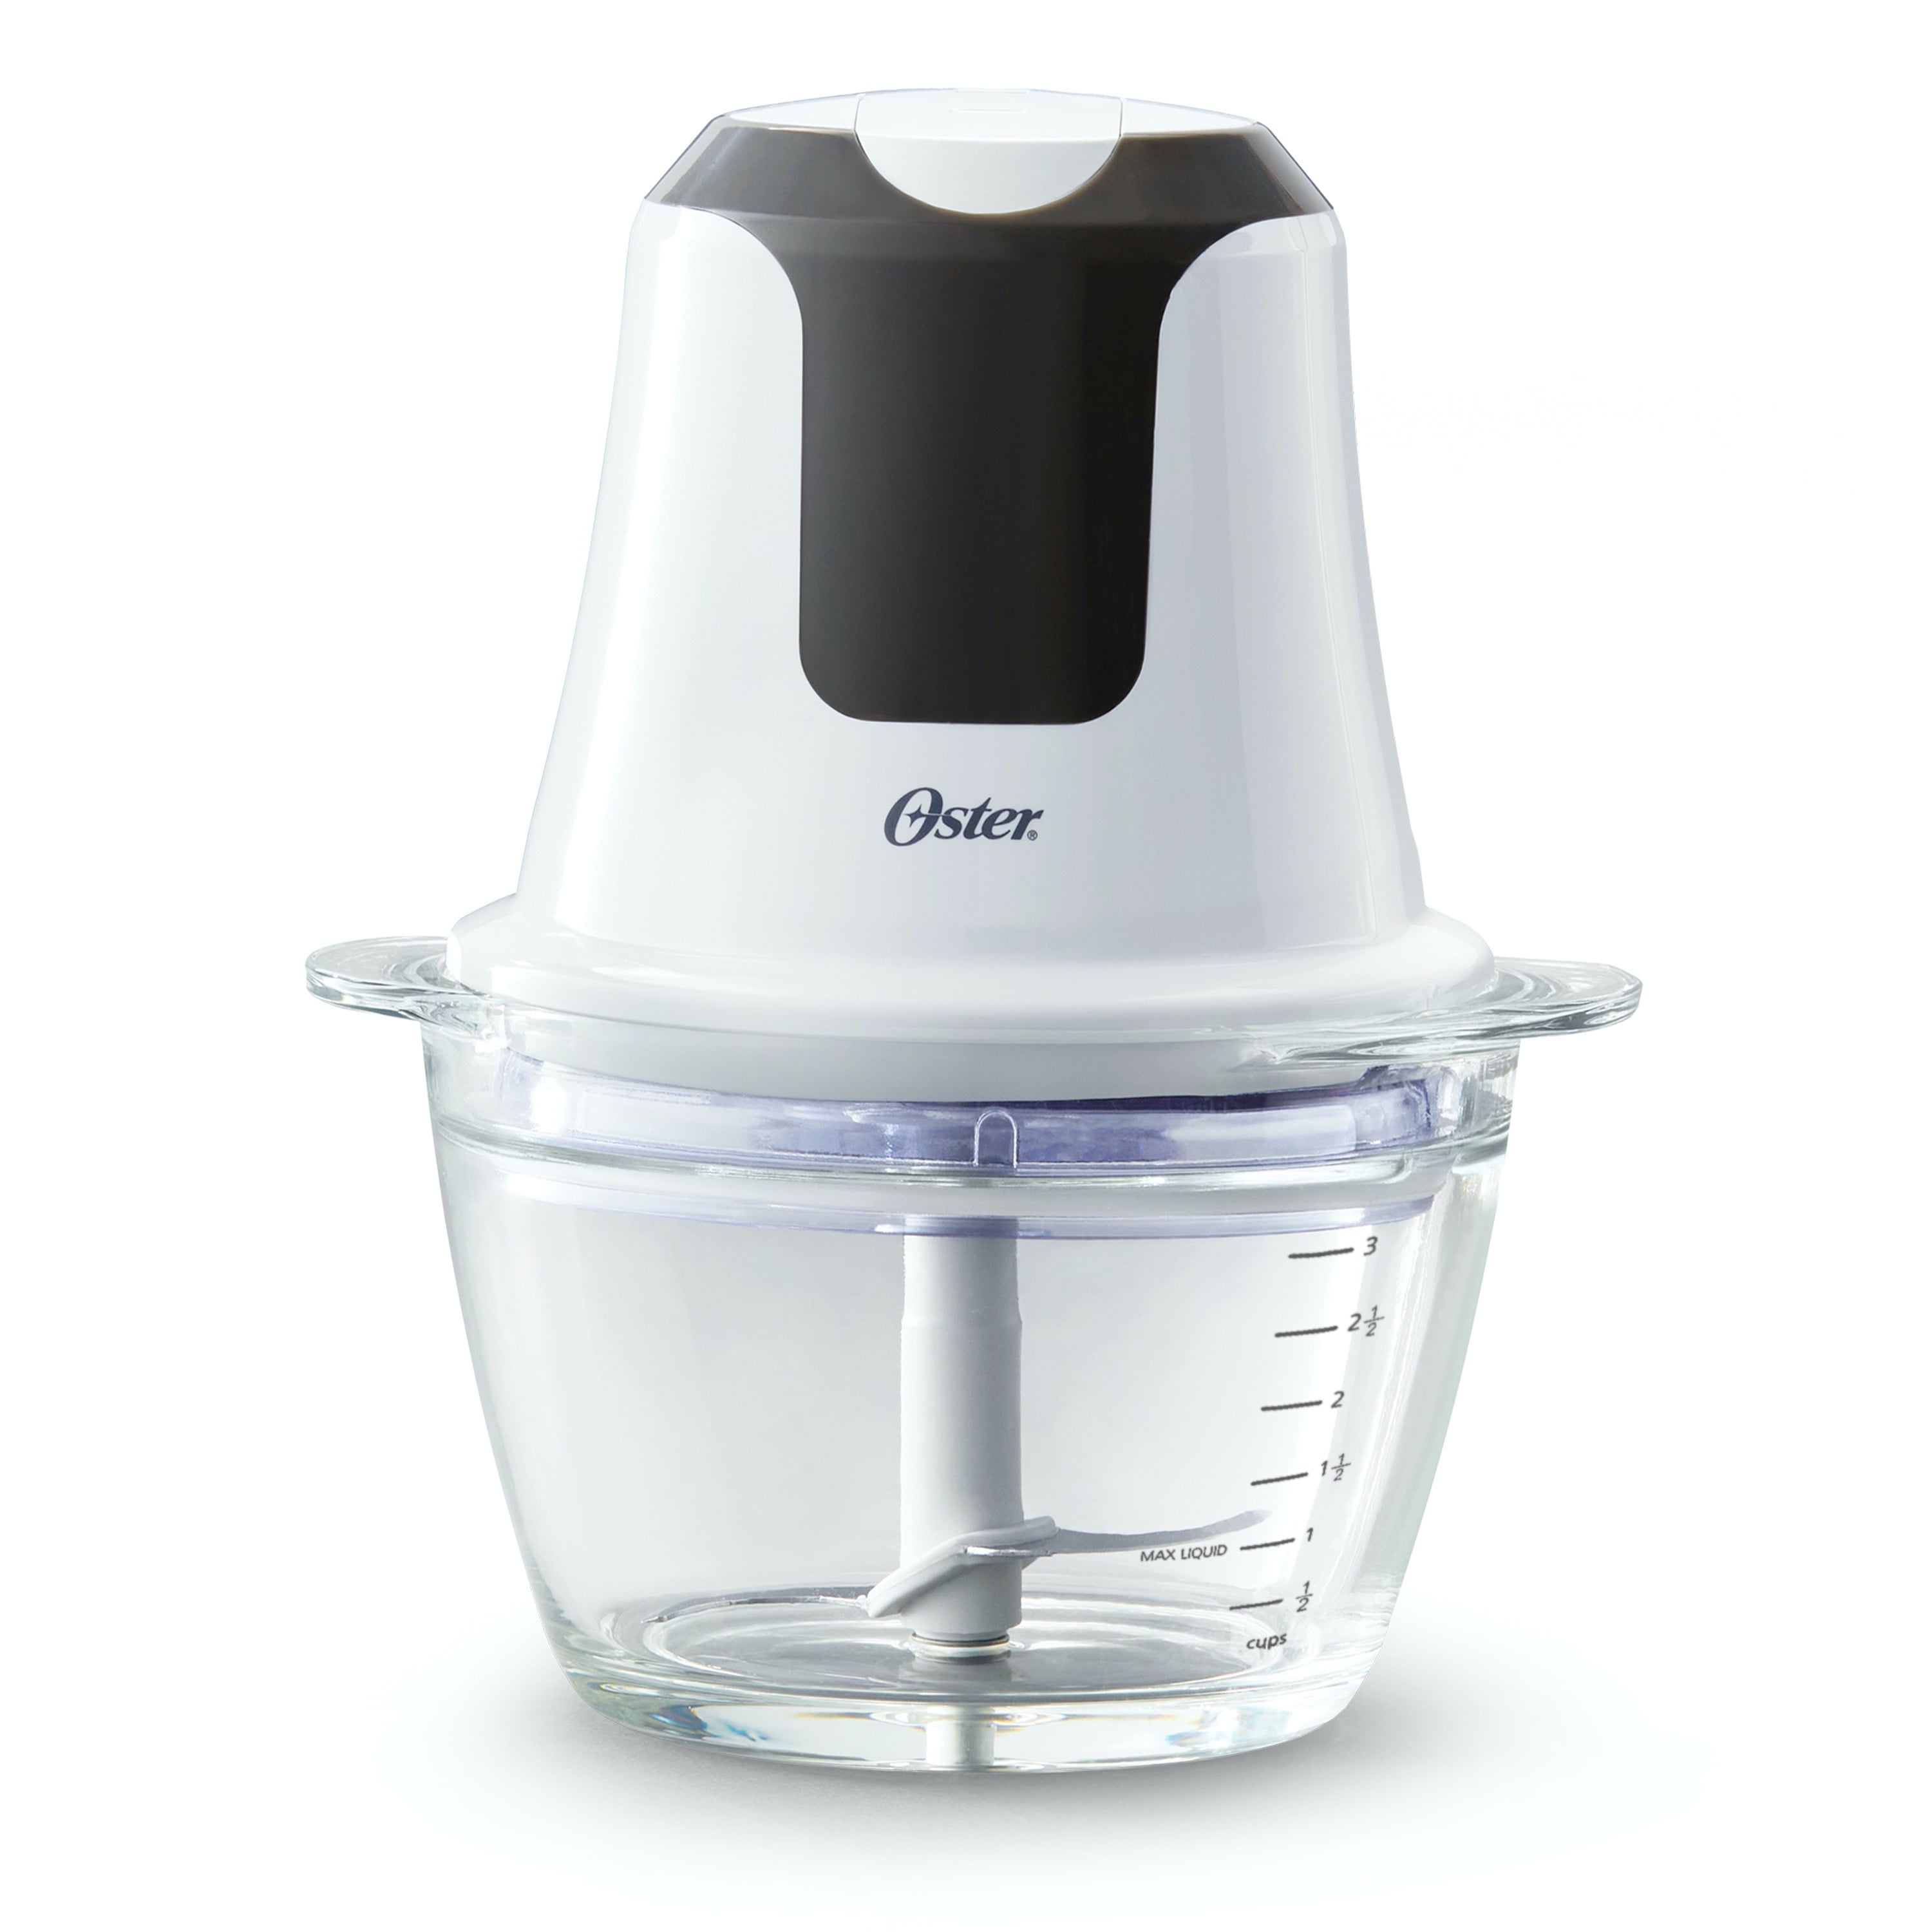 Oster 3-Cup Mini Food with Tempered Glass Bowl -